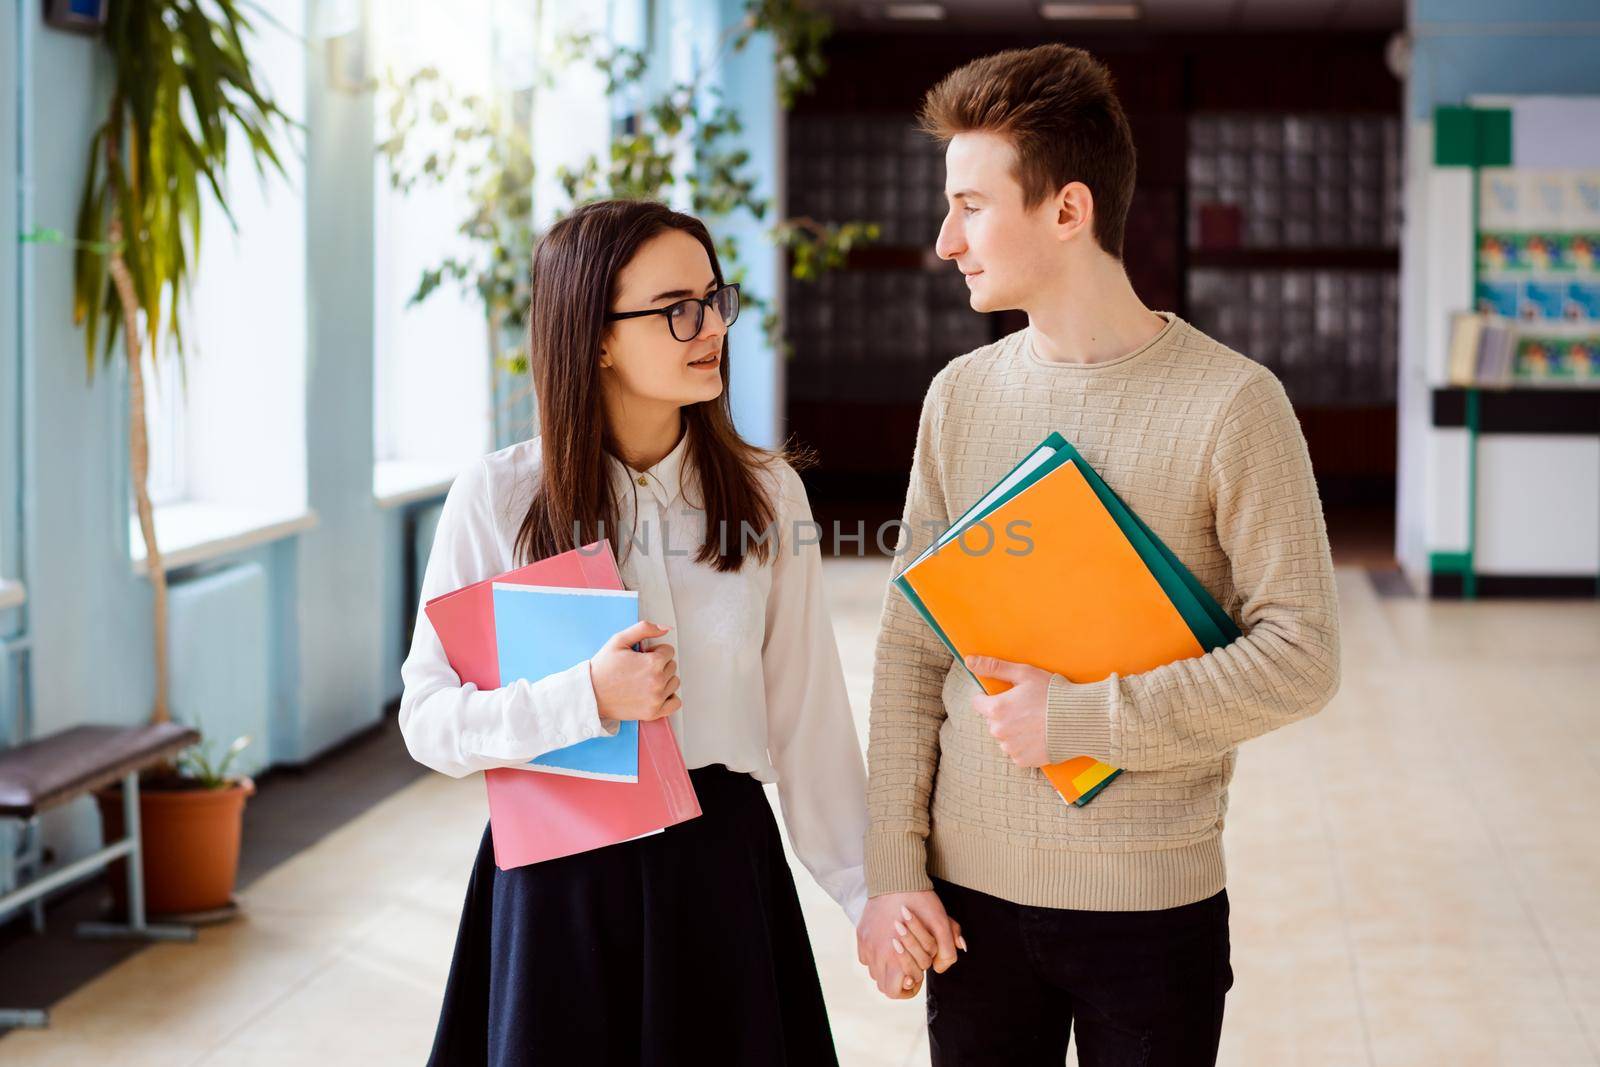 Male and female students in love studying together in the conventional college